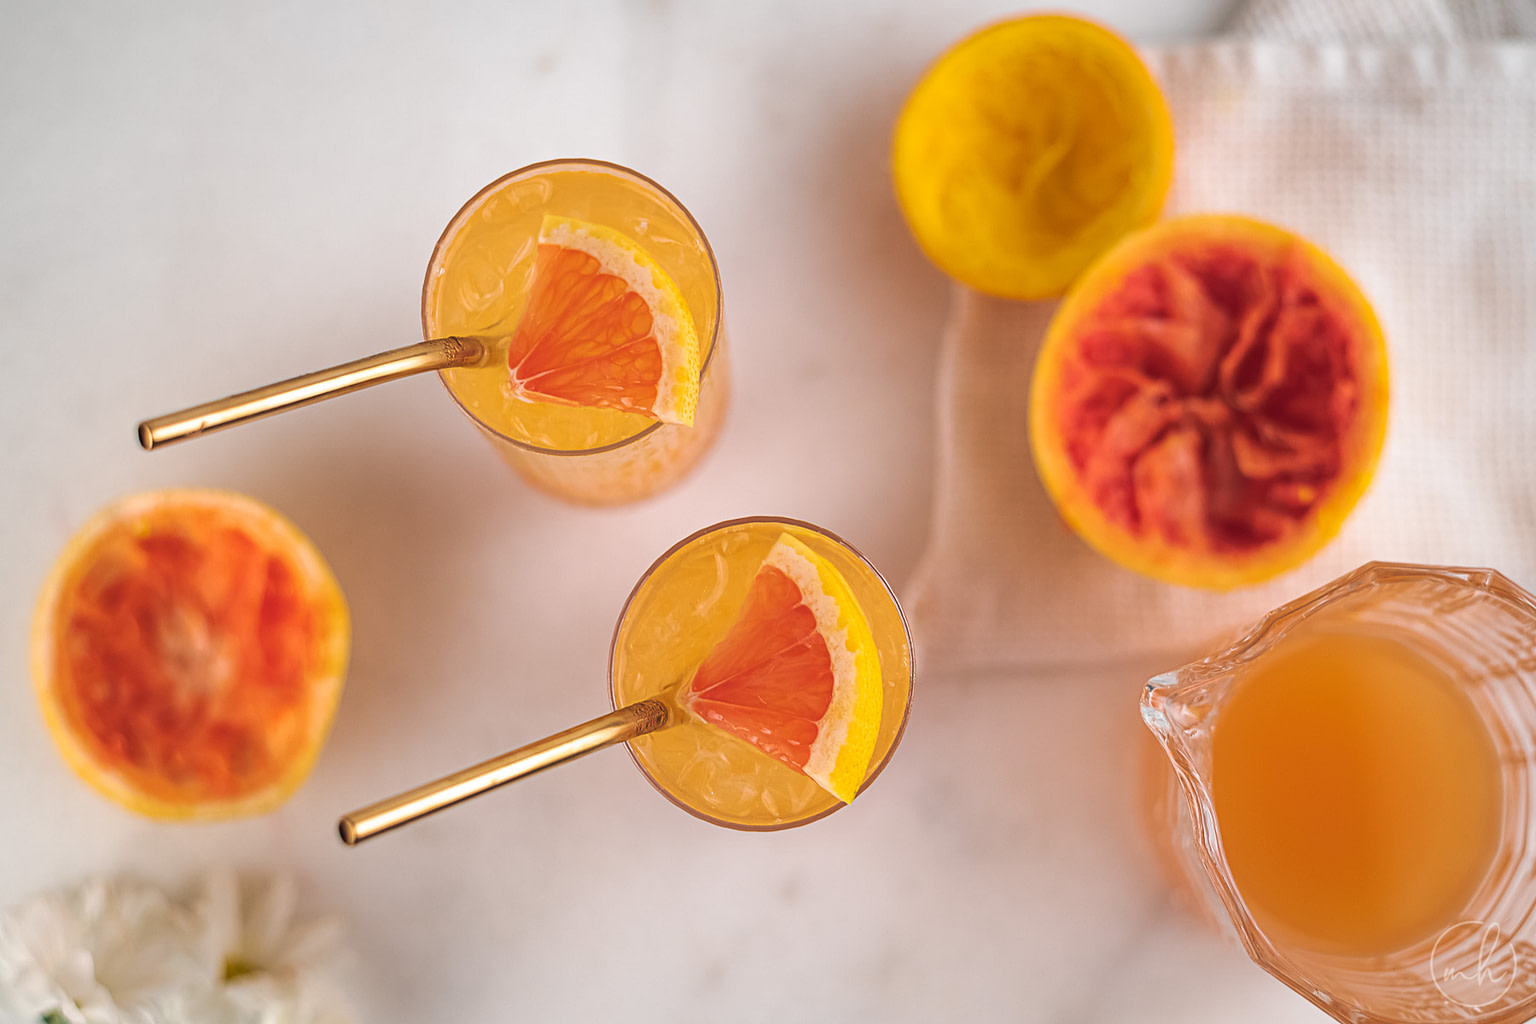 Two glasses of citrus riot juice with metal straws. Squeezed orange and grapefruit pieces with a jar of leftover juice is also placed.